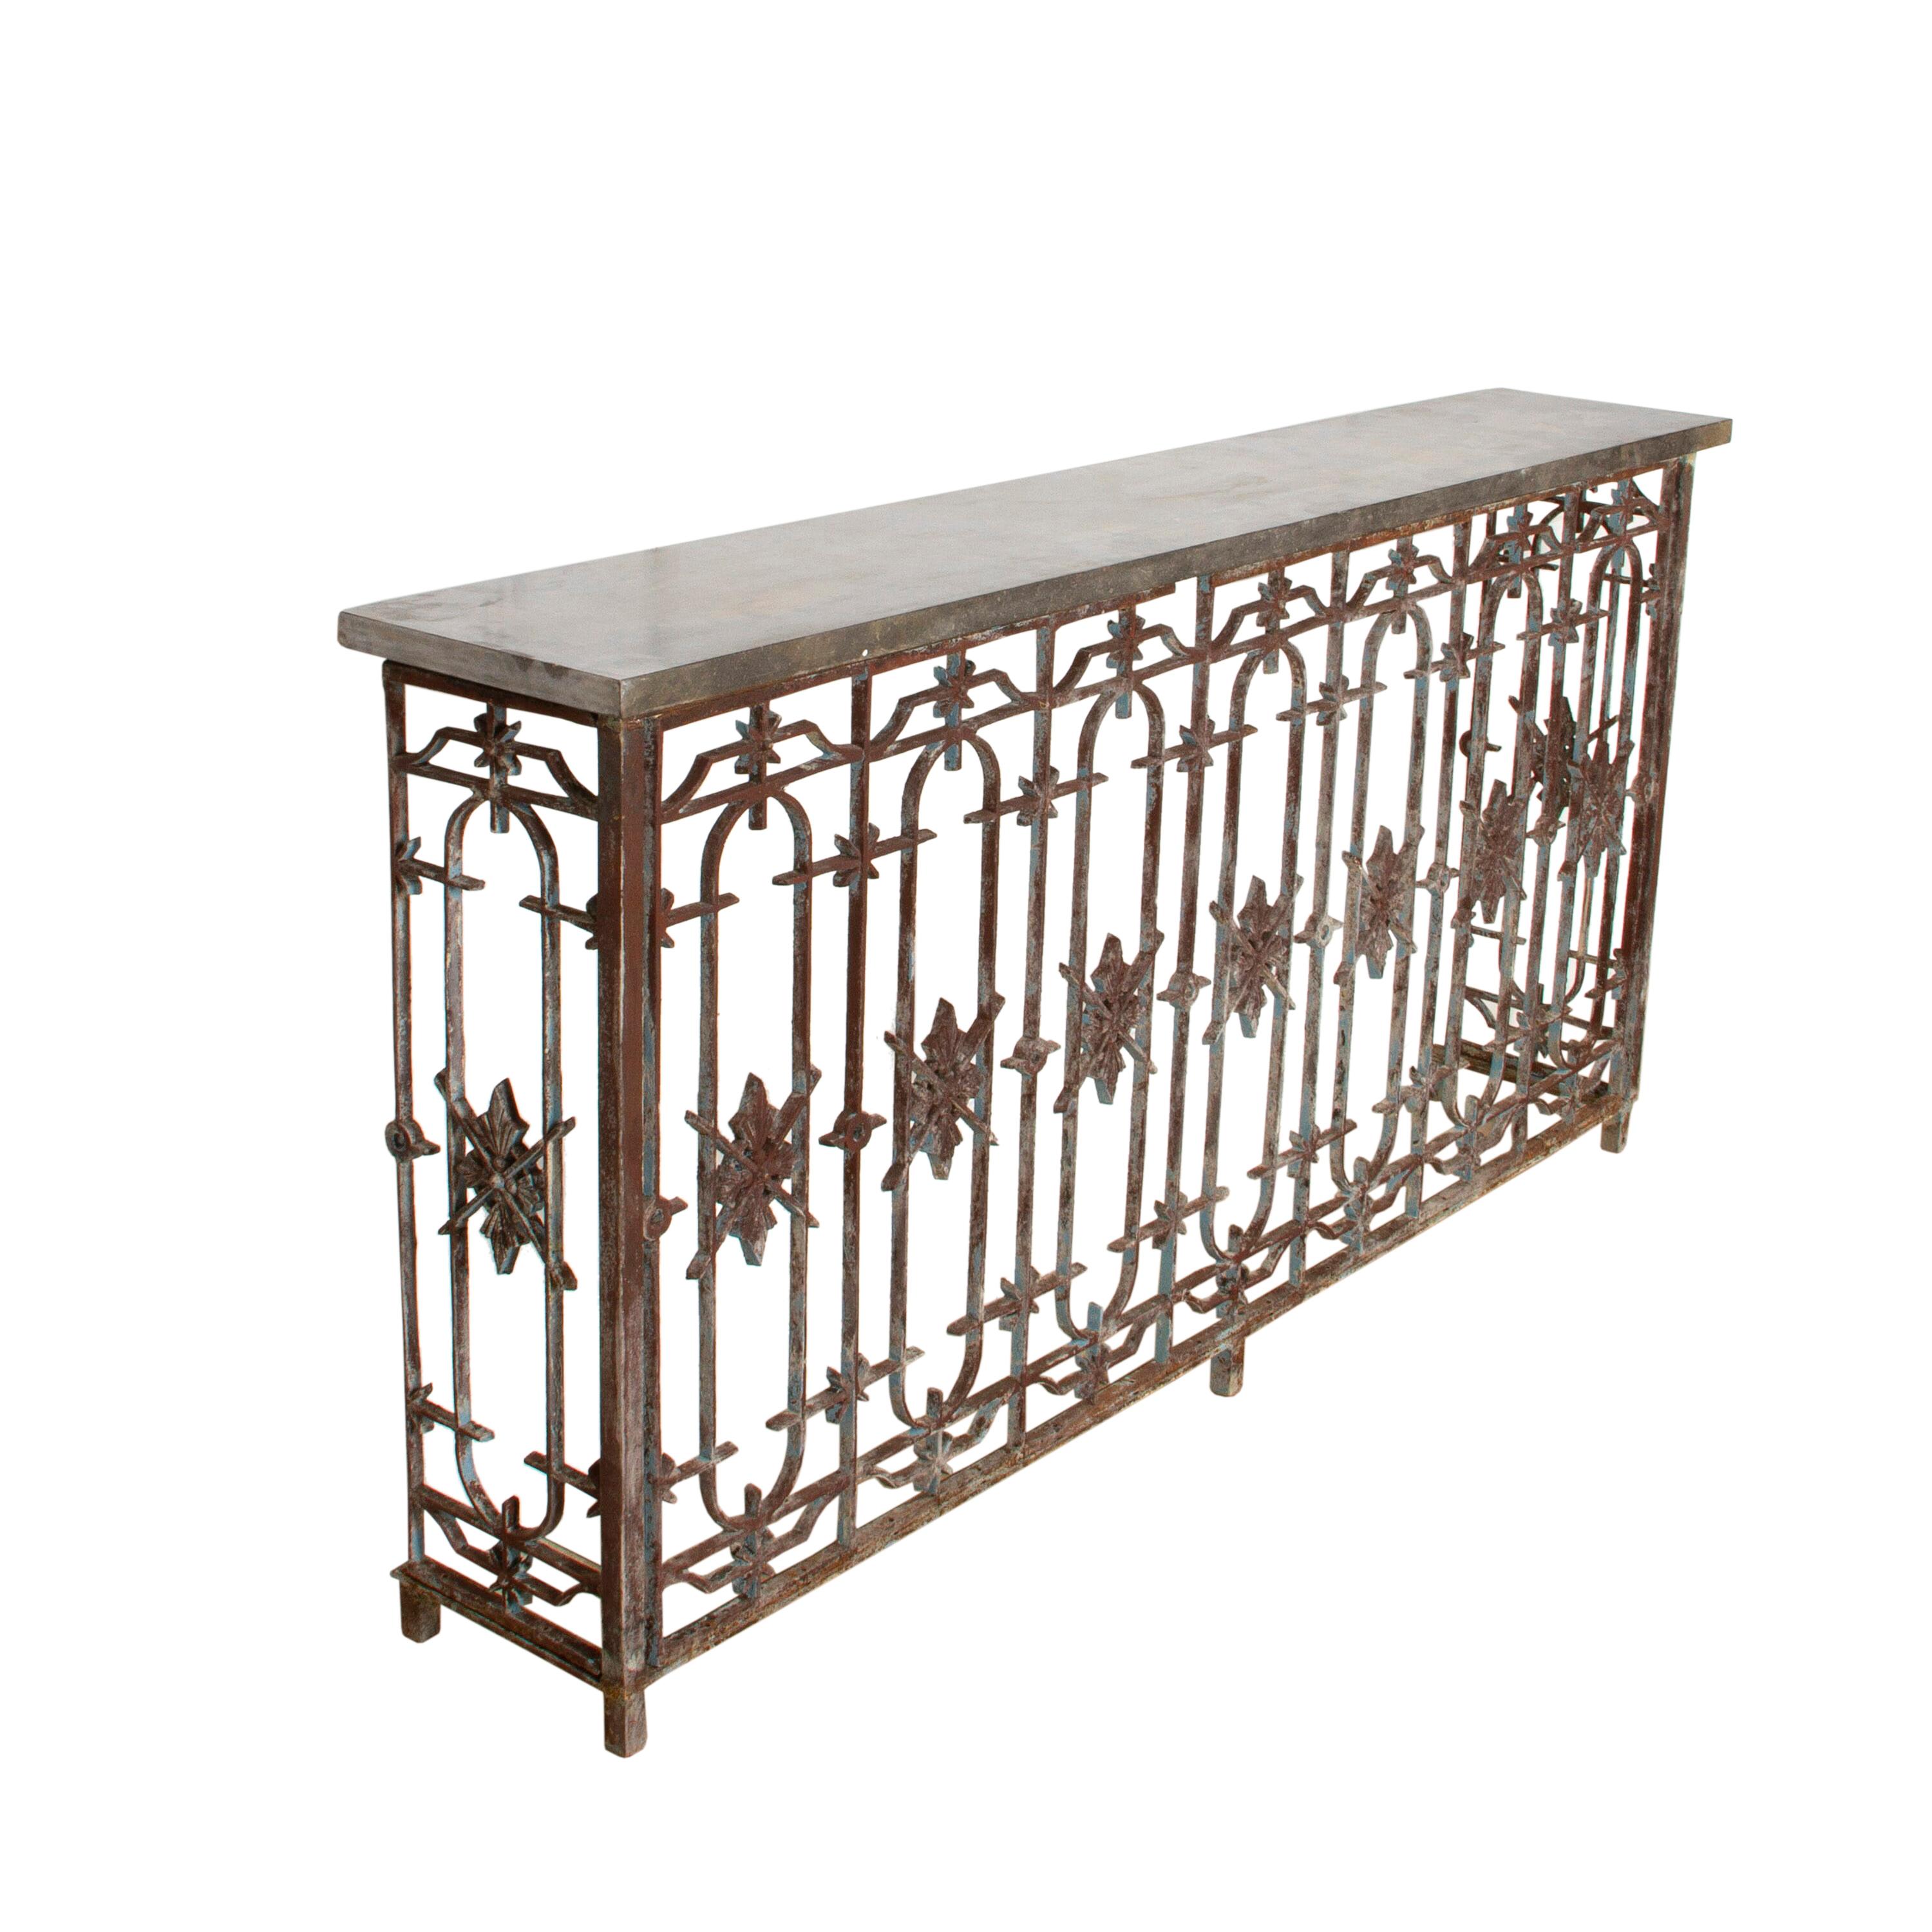 Striking 19th century balcony console. Originally from France, this console would have surrounded a window, overlooking the landscape. This console is a fine example of French ironmongery because of its stability and craftsmanship. It is decorated